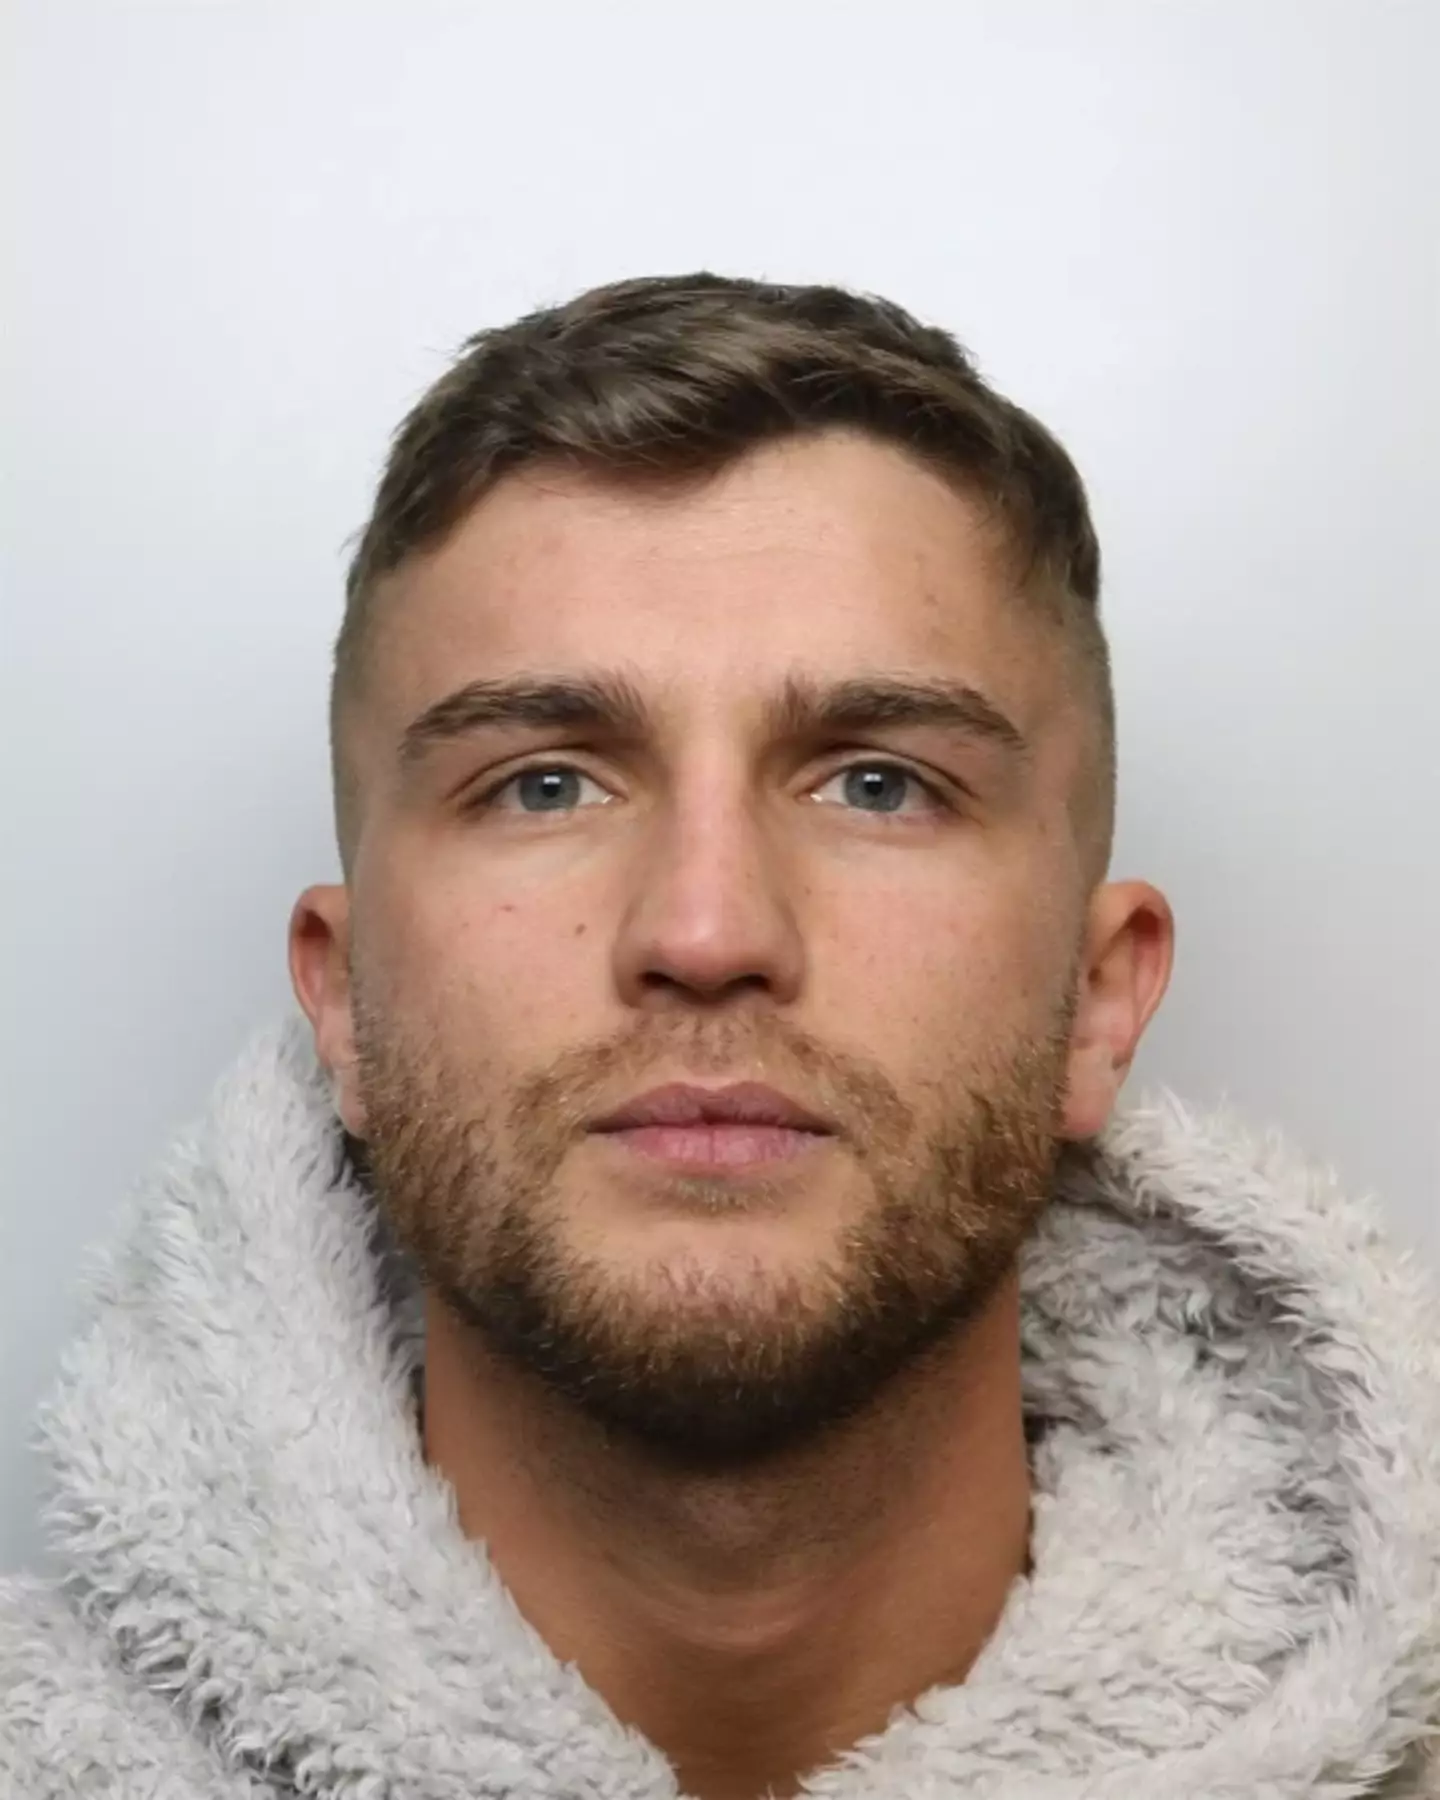 28-year-old Joseph Shaw pleaded guilty to supplying heroin and conspiracy to supply cocaine, and has now been jailed for six-and-a-half years.